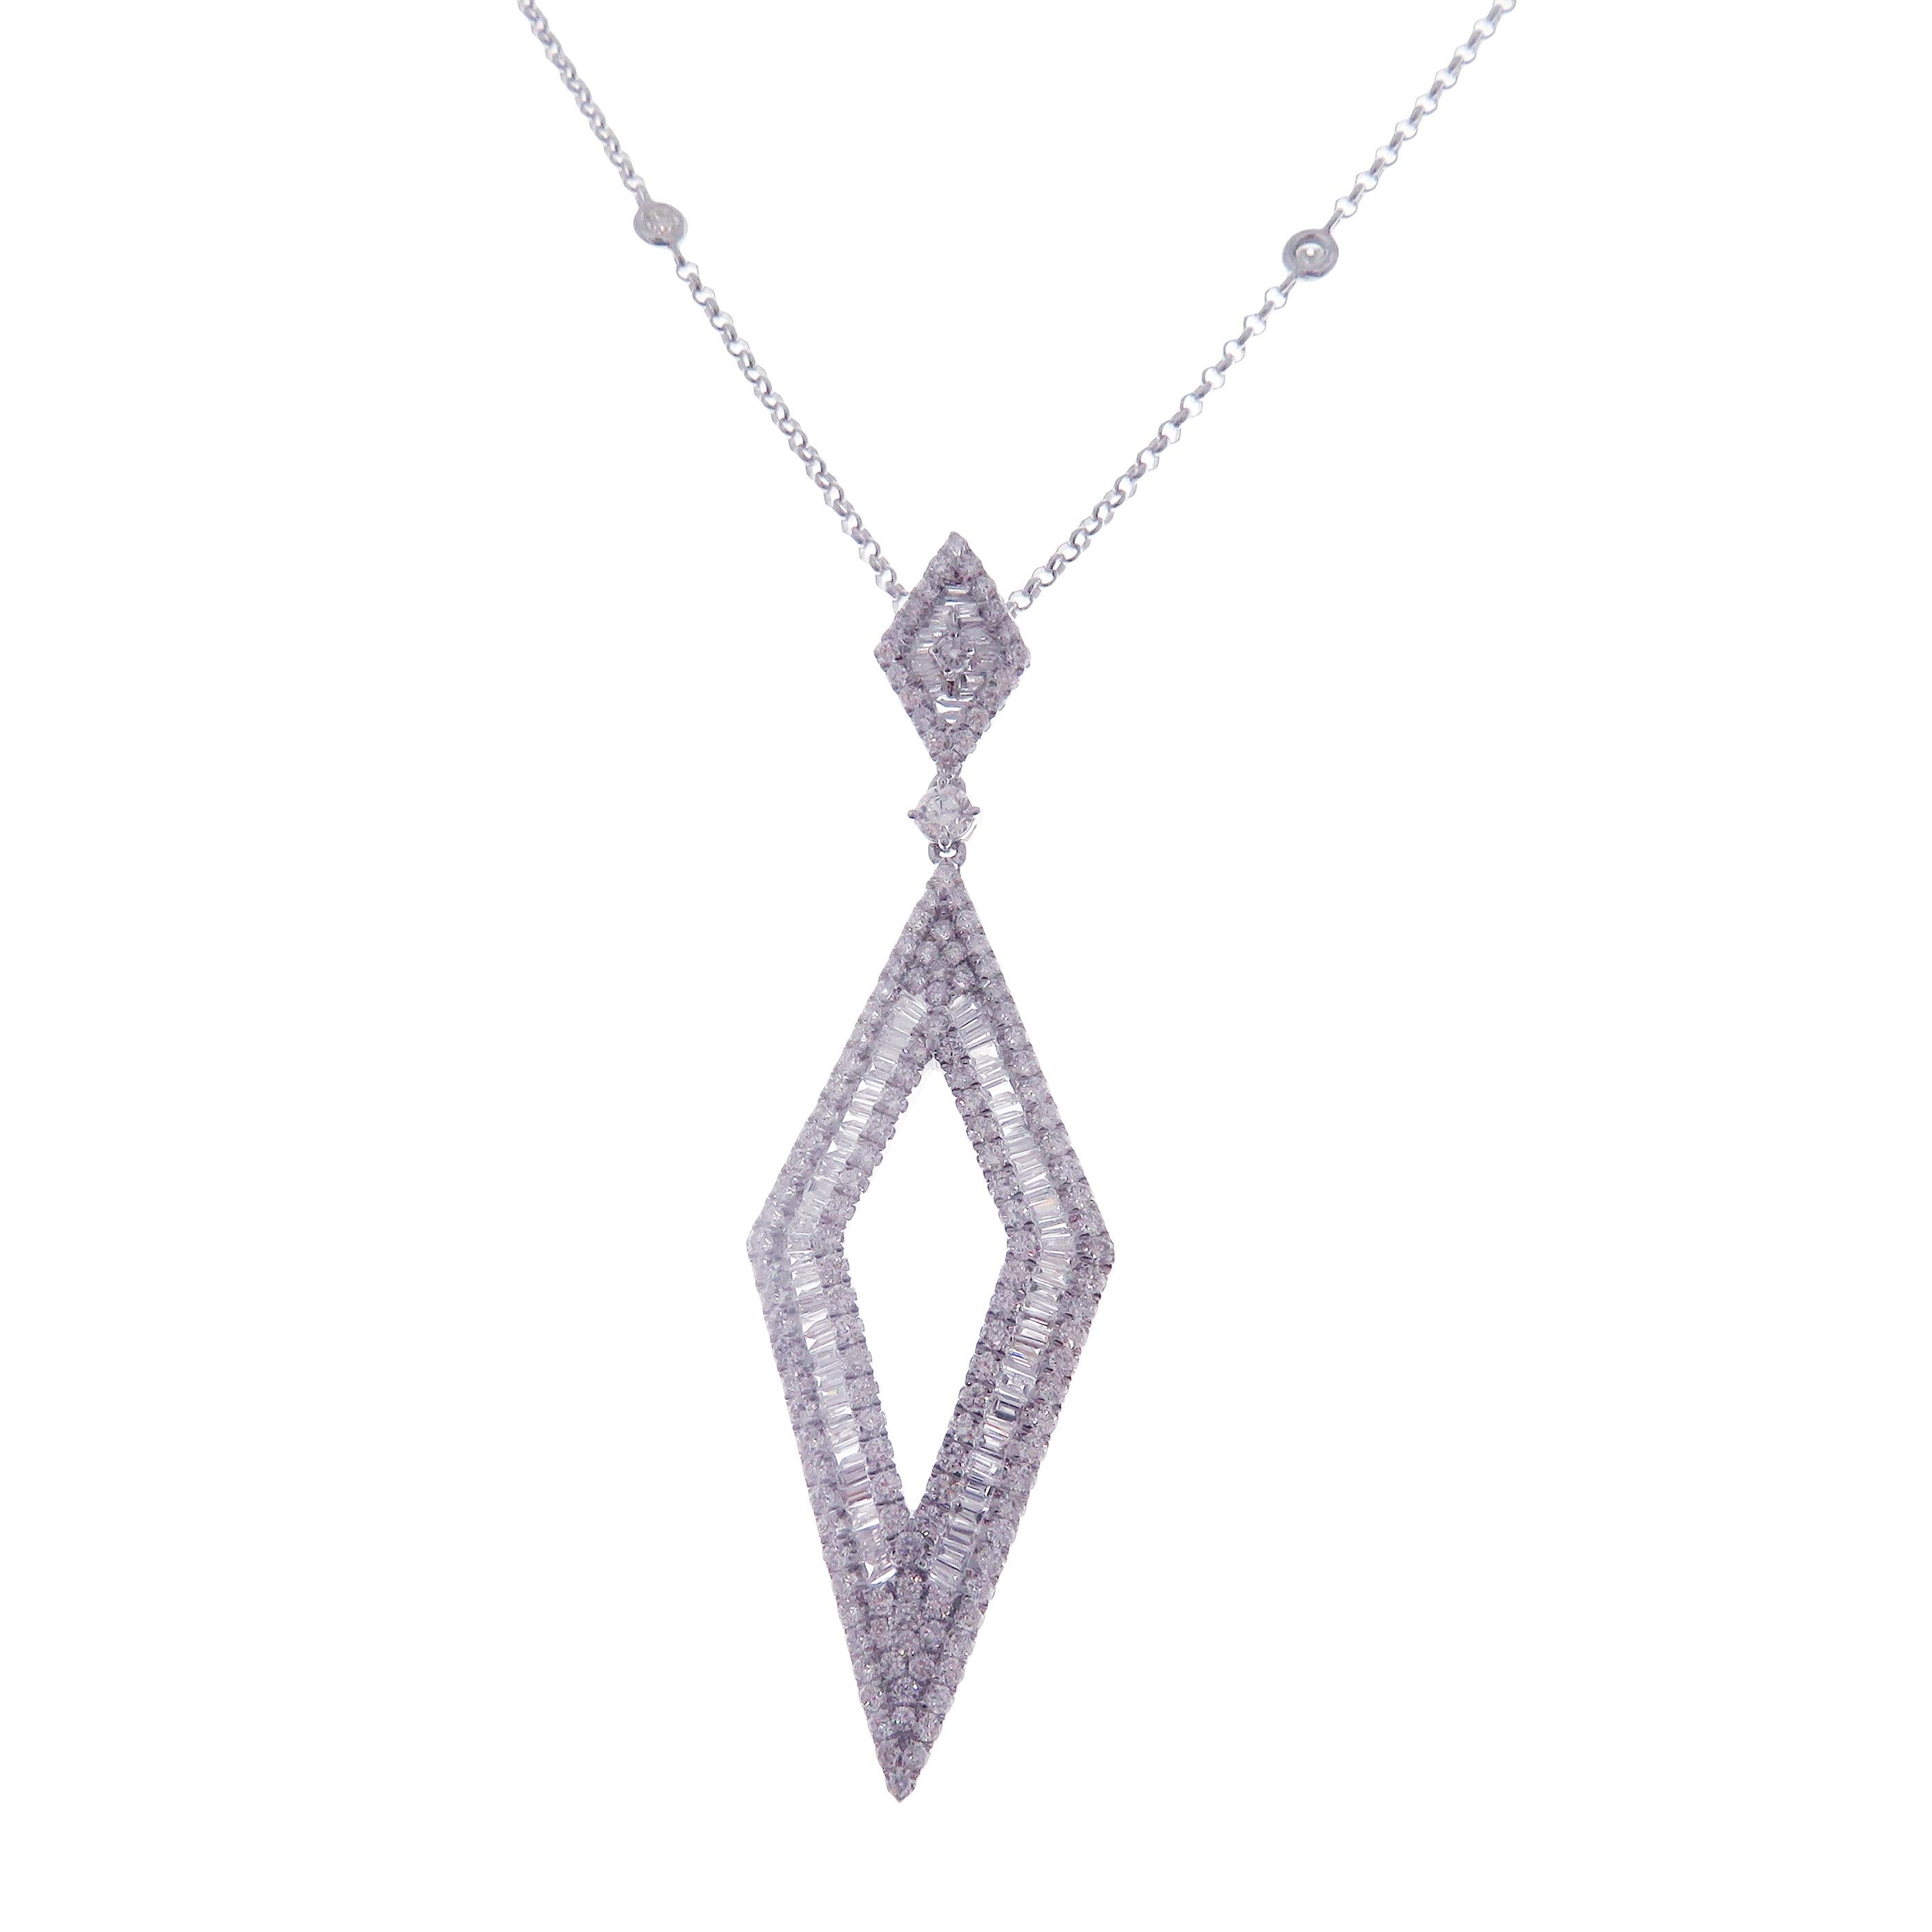 This diamond baguette necklace is crafted in 18-karat white gold, weighing approximately 2.80 total carats of SI-H Quality white diamonds.

Necklace is 16